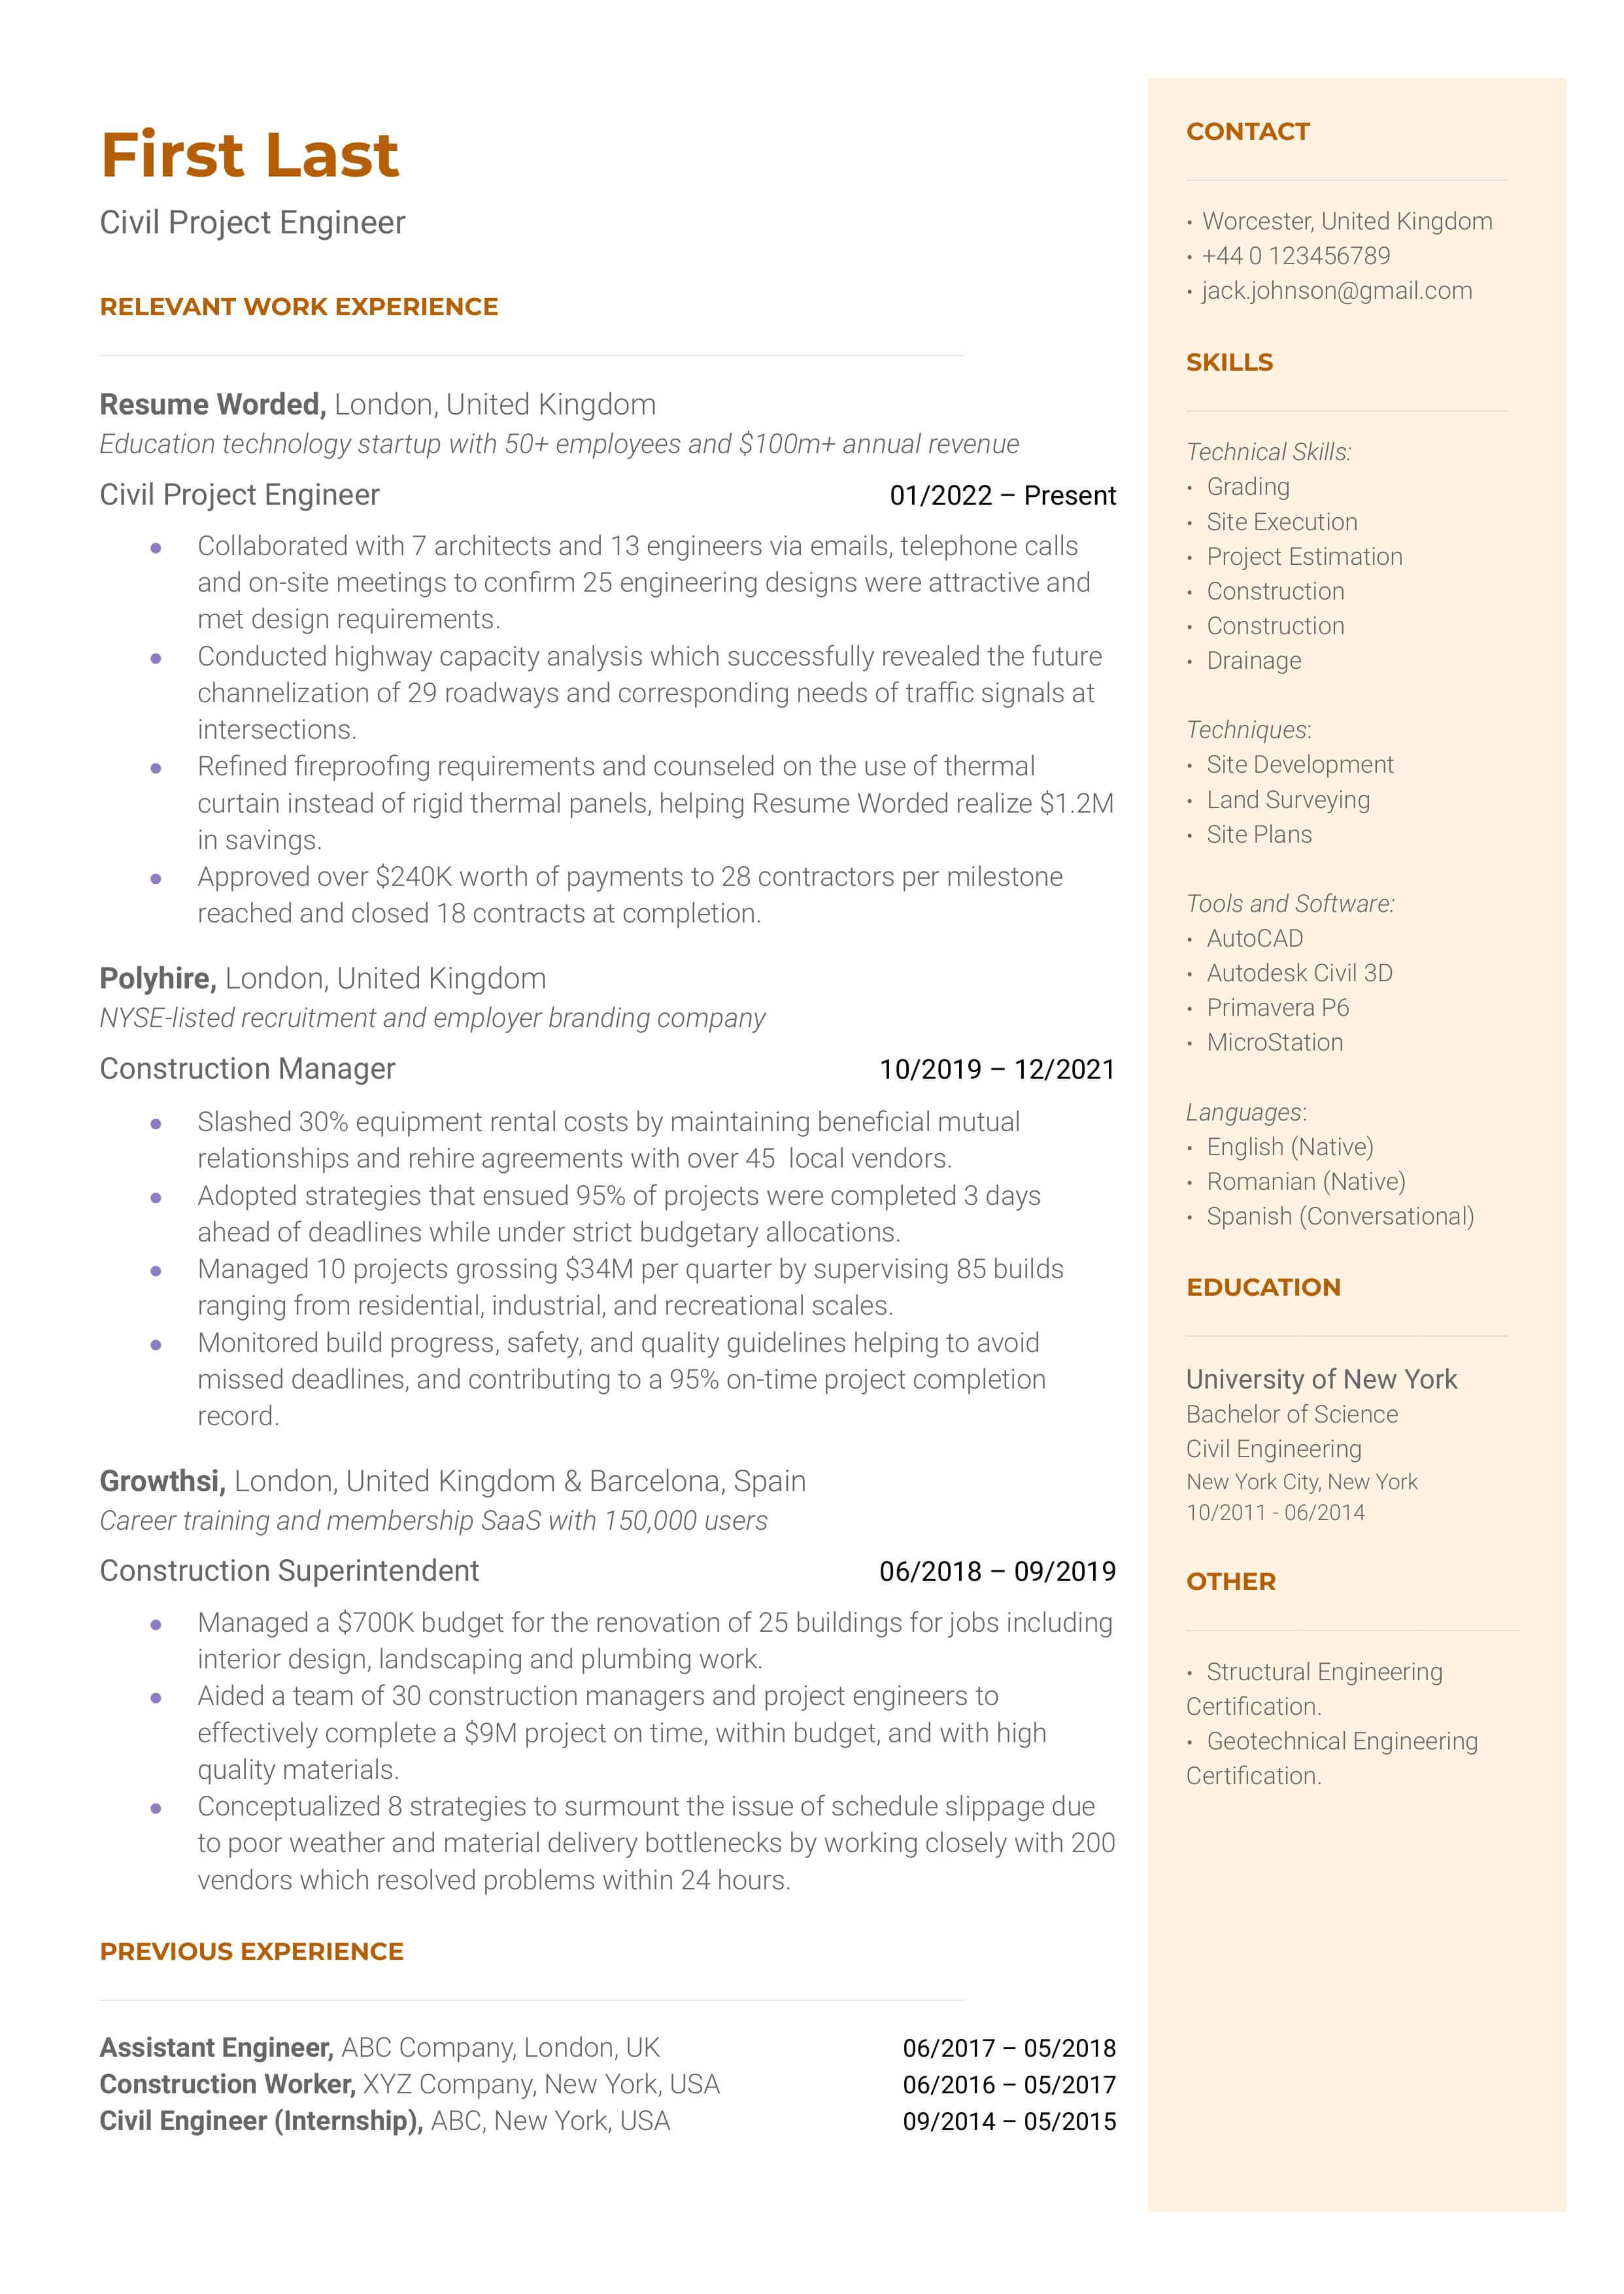 A well-structured CV of a Civil Project Engineer focusing on technical skills and project achievements.